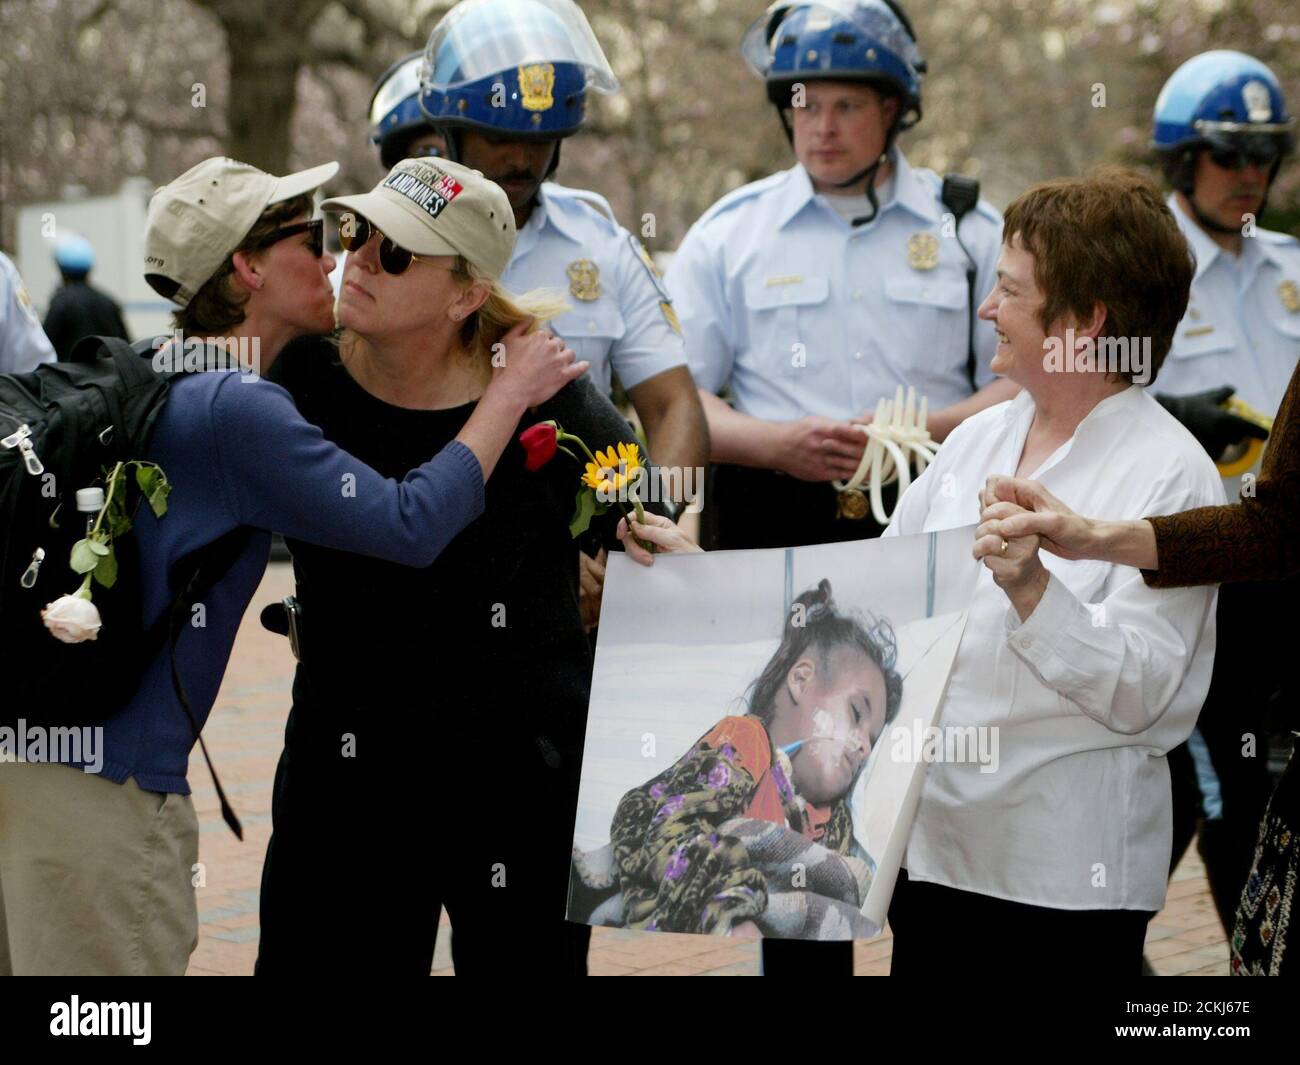 Nobel Peace Prize laureate and International Campaign to Ban Landmines founder Jody Williams (C) gets a hug from ICBL coordinator Elizabeth Bernstein (L) as U.S. Park police officers cuff her hands behind her back and arrest her, in front of the White House in Washington March 26, 2003. Fellow Nobel Peace Prize laureate from Northern Ireland Mairead Corrigan Maguire waits to be arrested. The Nobel winners were joining in a non-violent civil disobedience action organized by religious leaders to protest the war in Iraq. REUTERS/Jim Bourg  JRB/GN Stock Photo